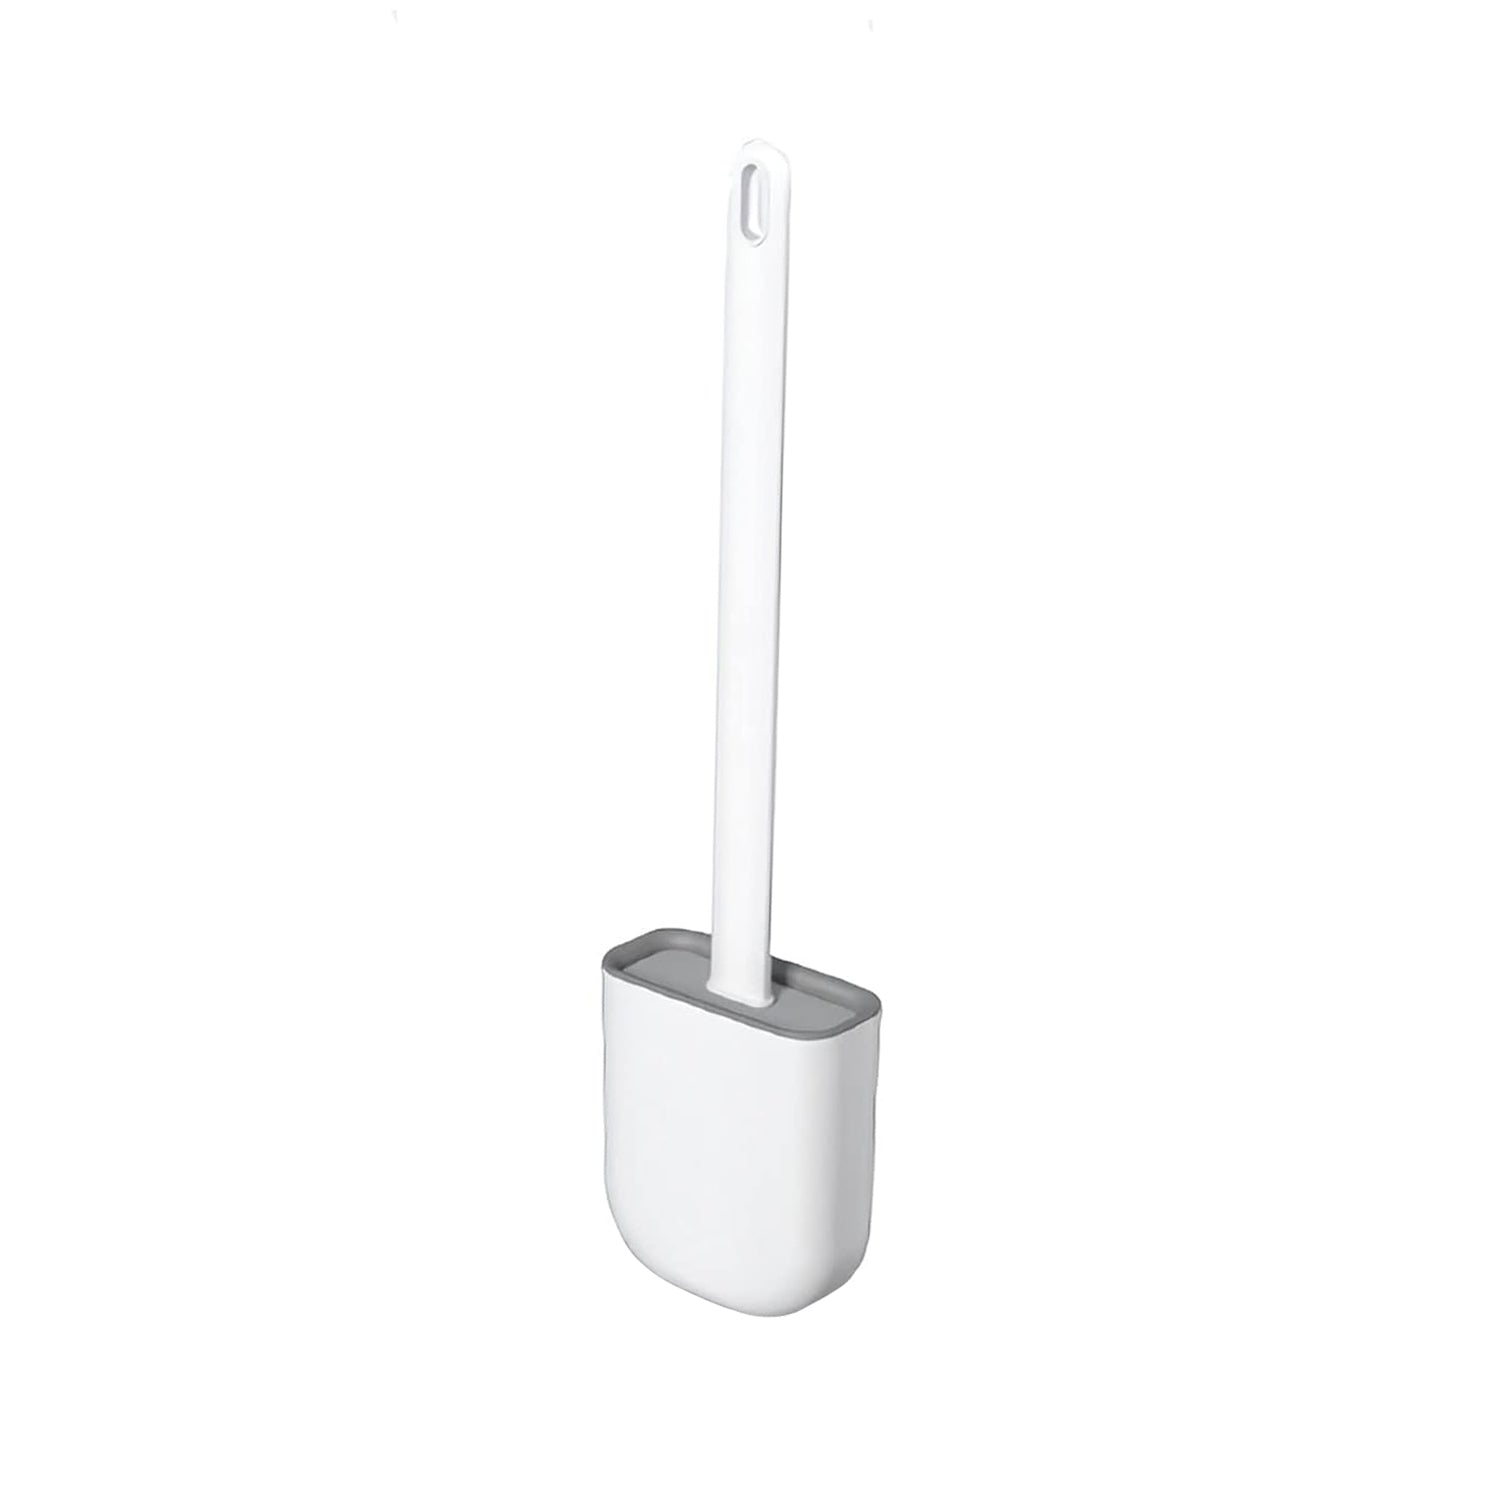 1420 Silicone Toilet Brush with Holder Stand for Bathroom Cleaning